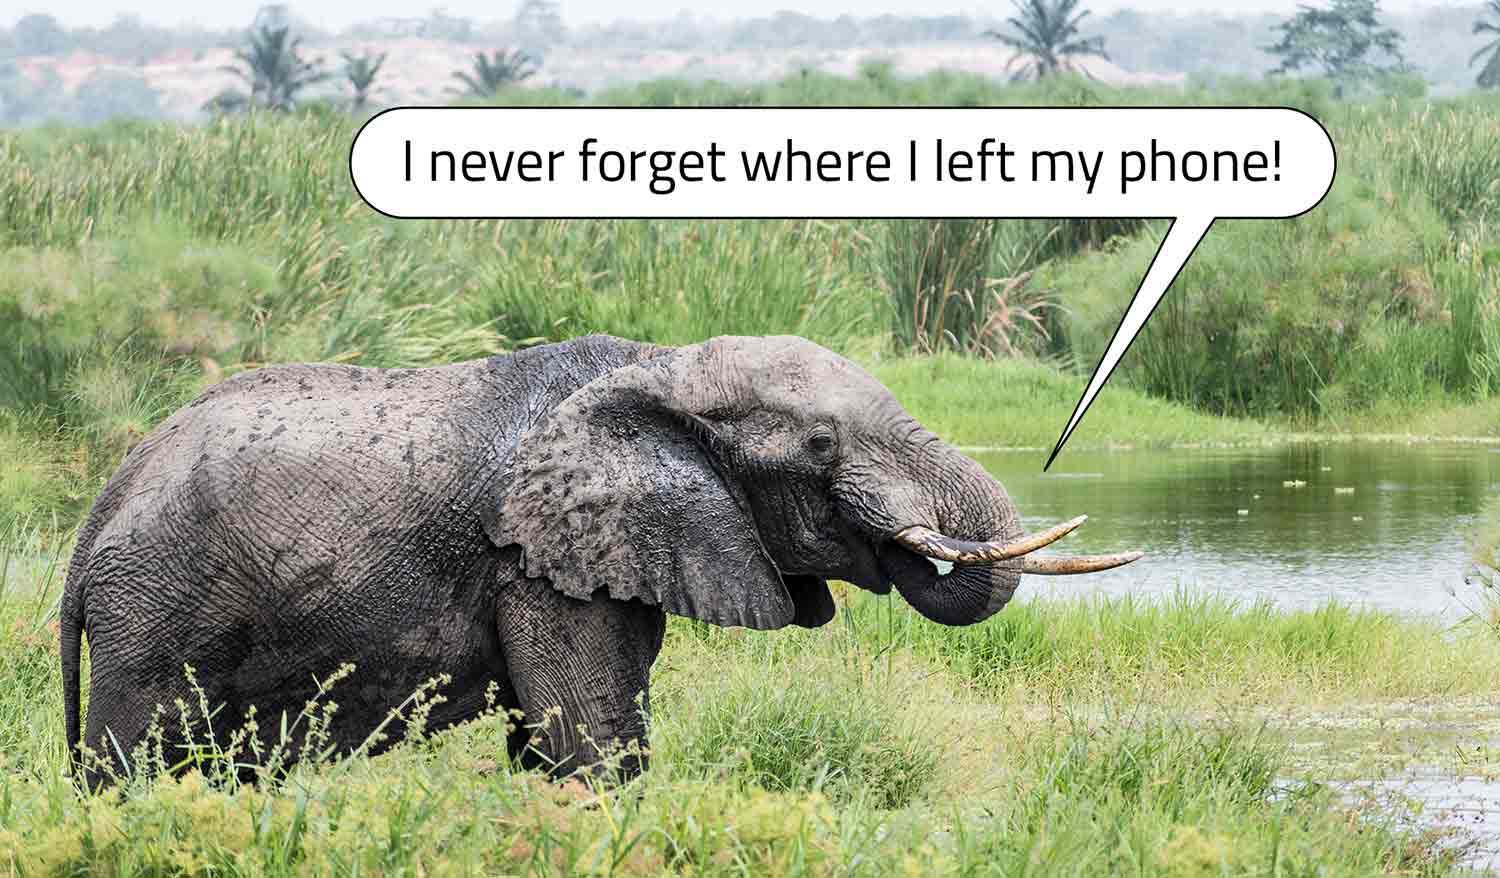 An elephant stands in tall grass with a talk bubble saying I never forget where I left my phone.